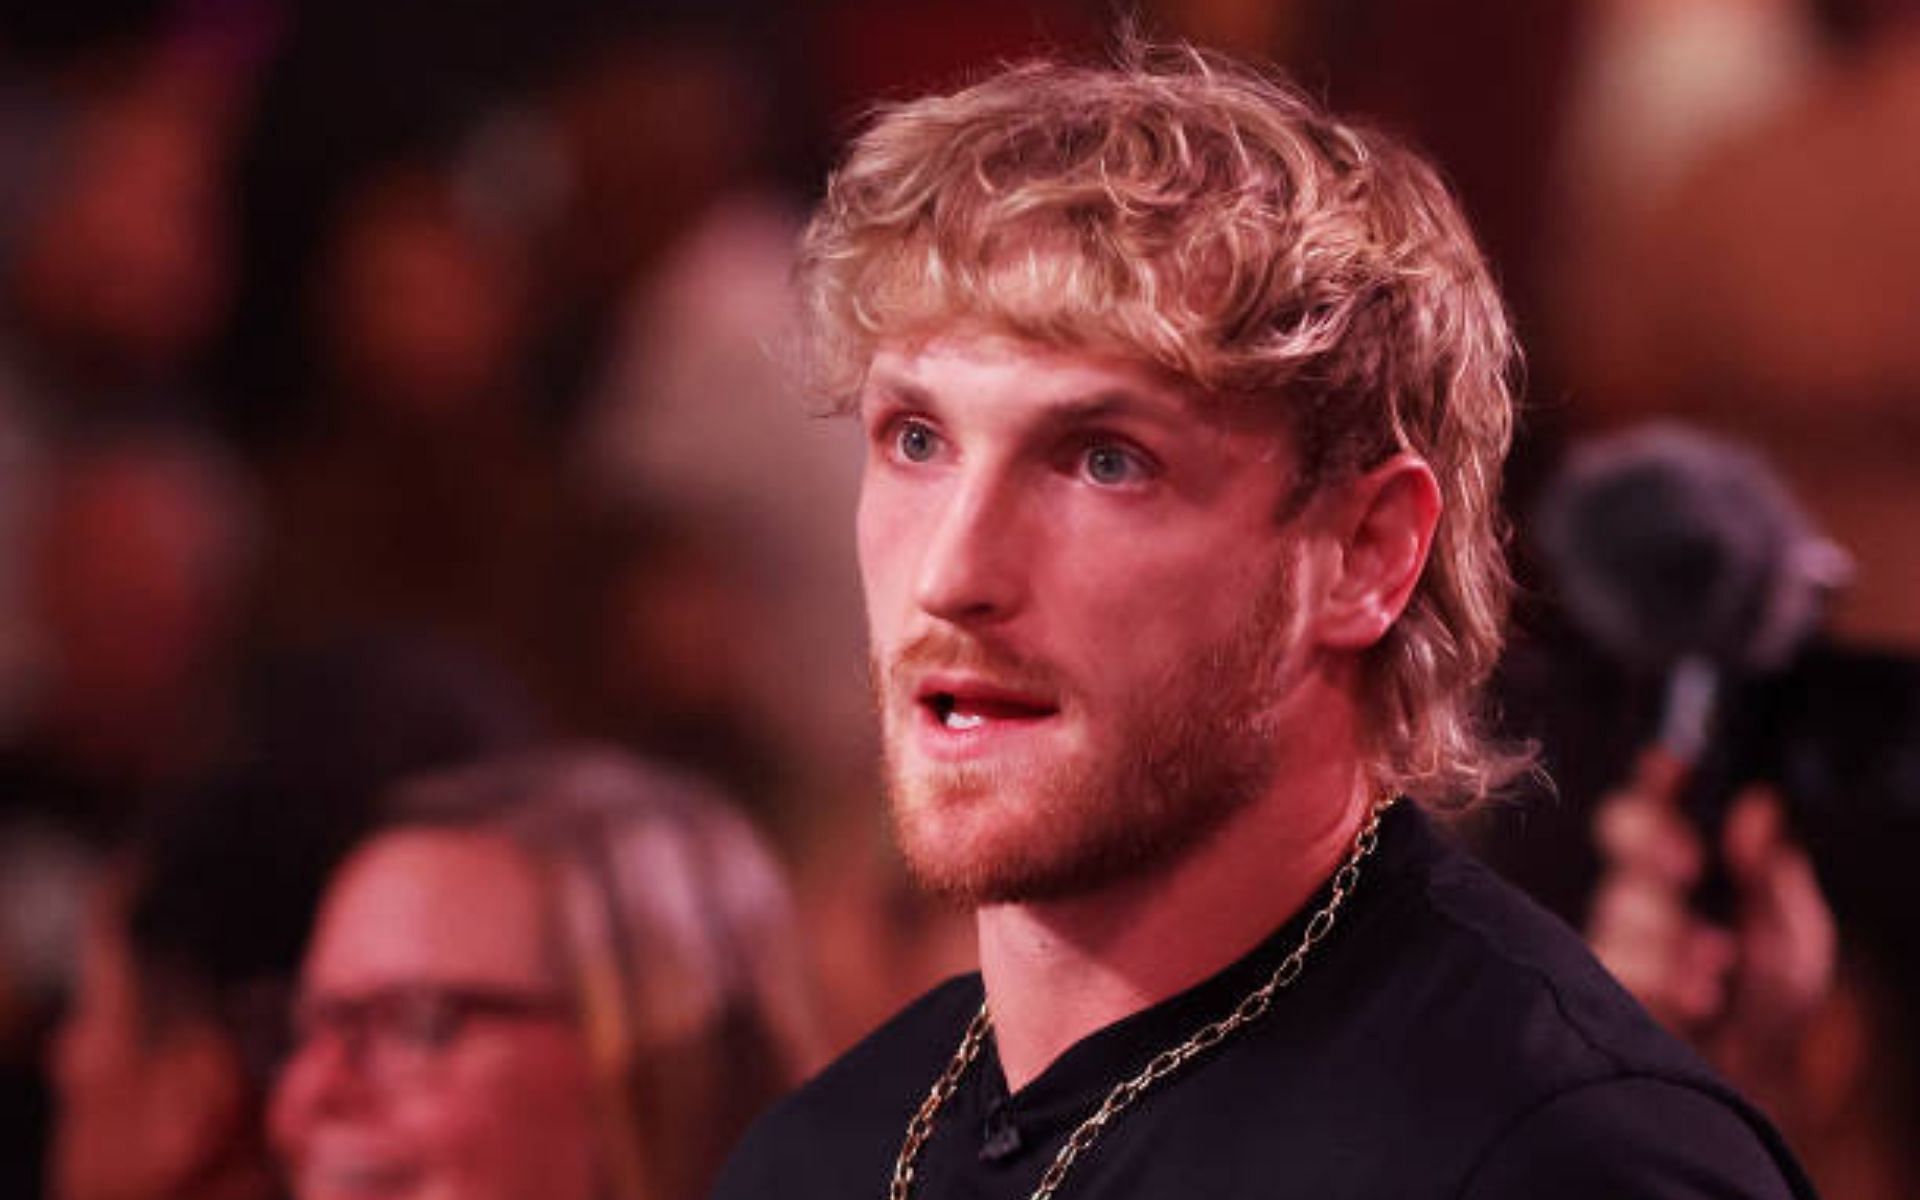 Prime sports drink co-founder Logan Paul